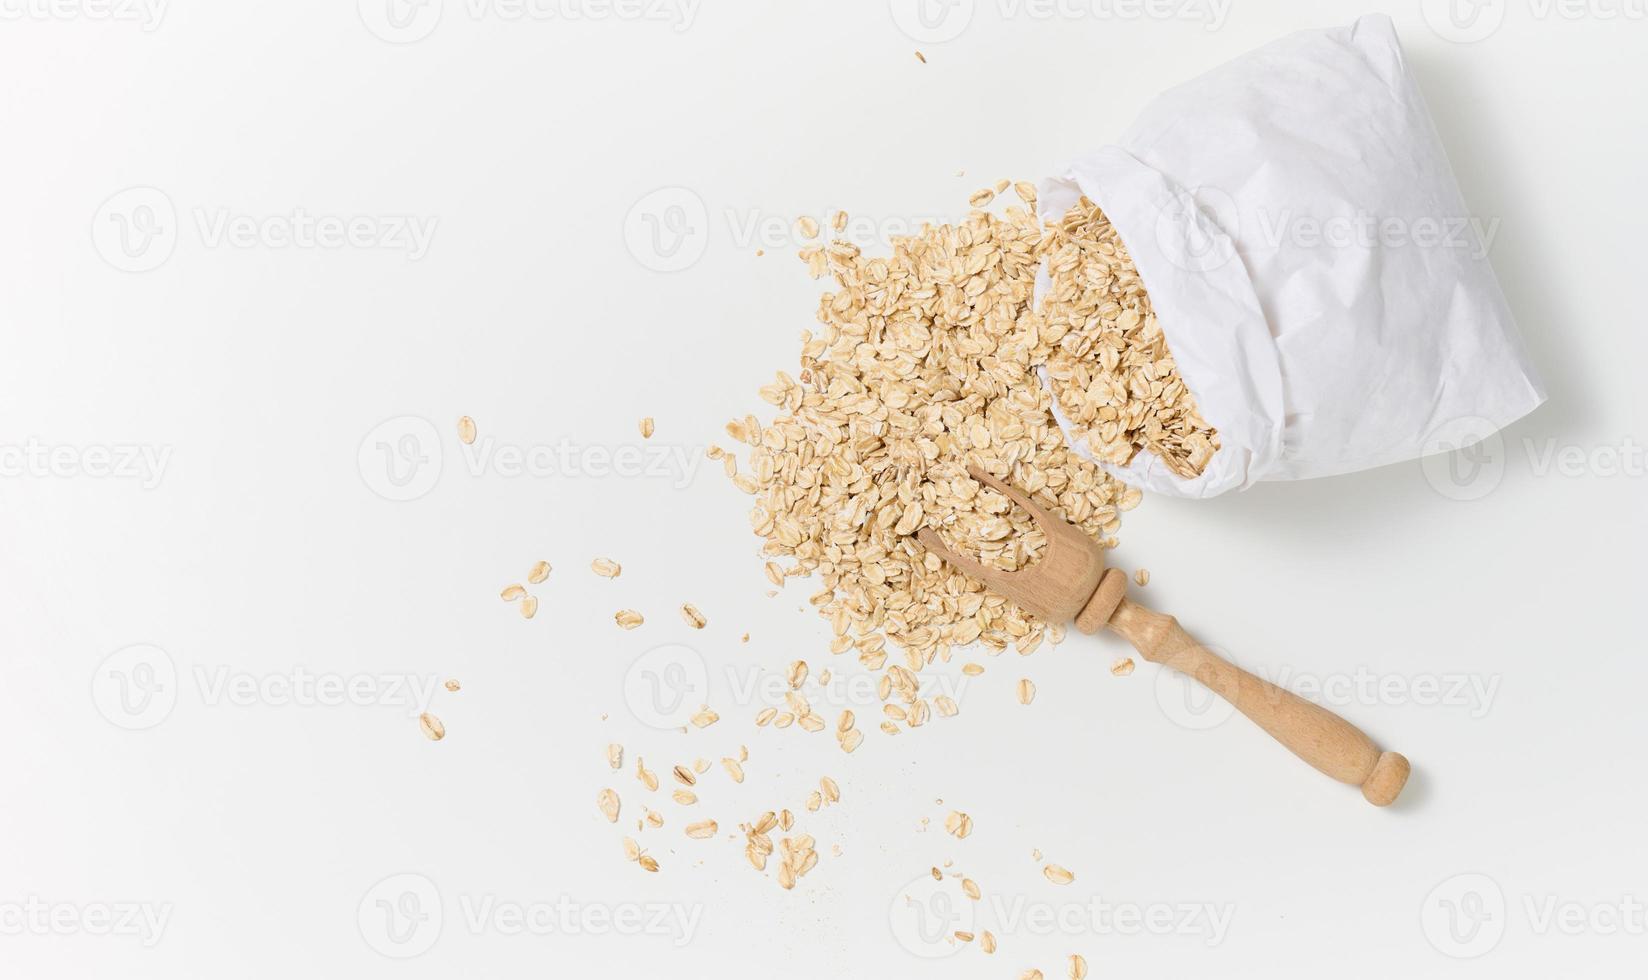 raw oatmeal in a white paper bag and a wooden spoon on a white table, breakfast porridge photo